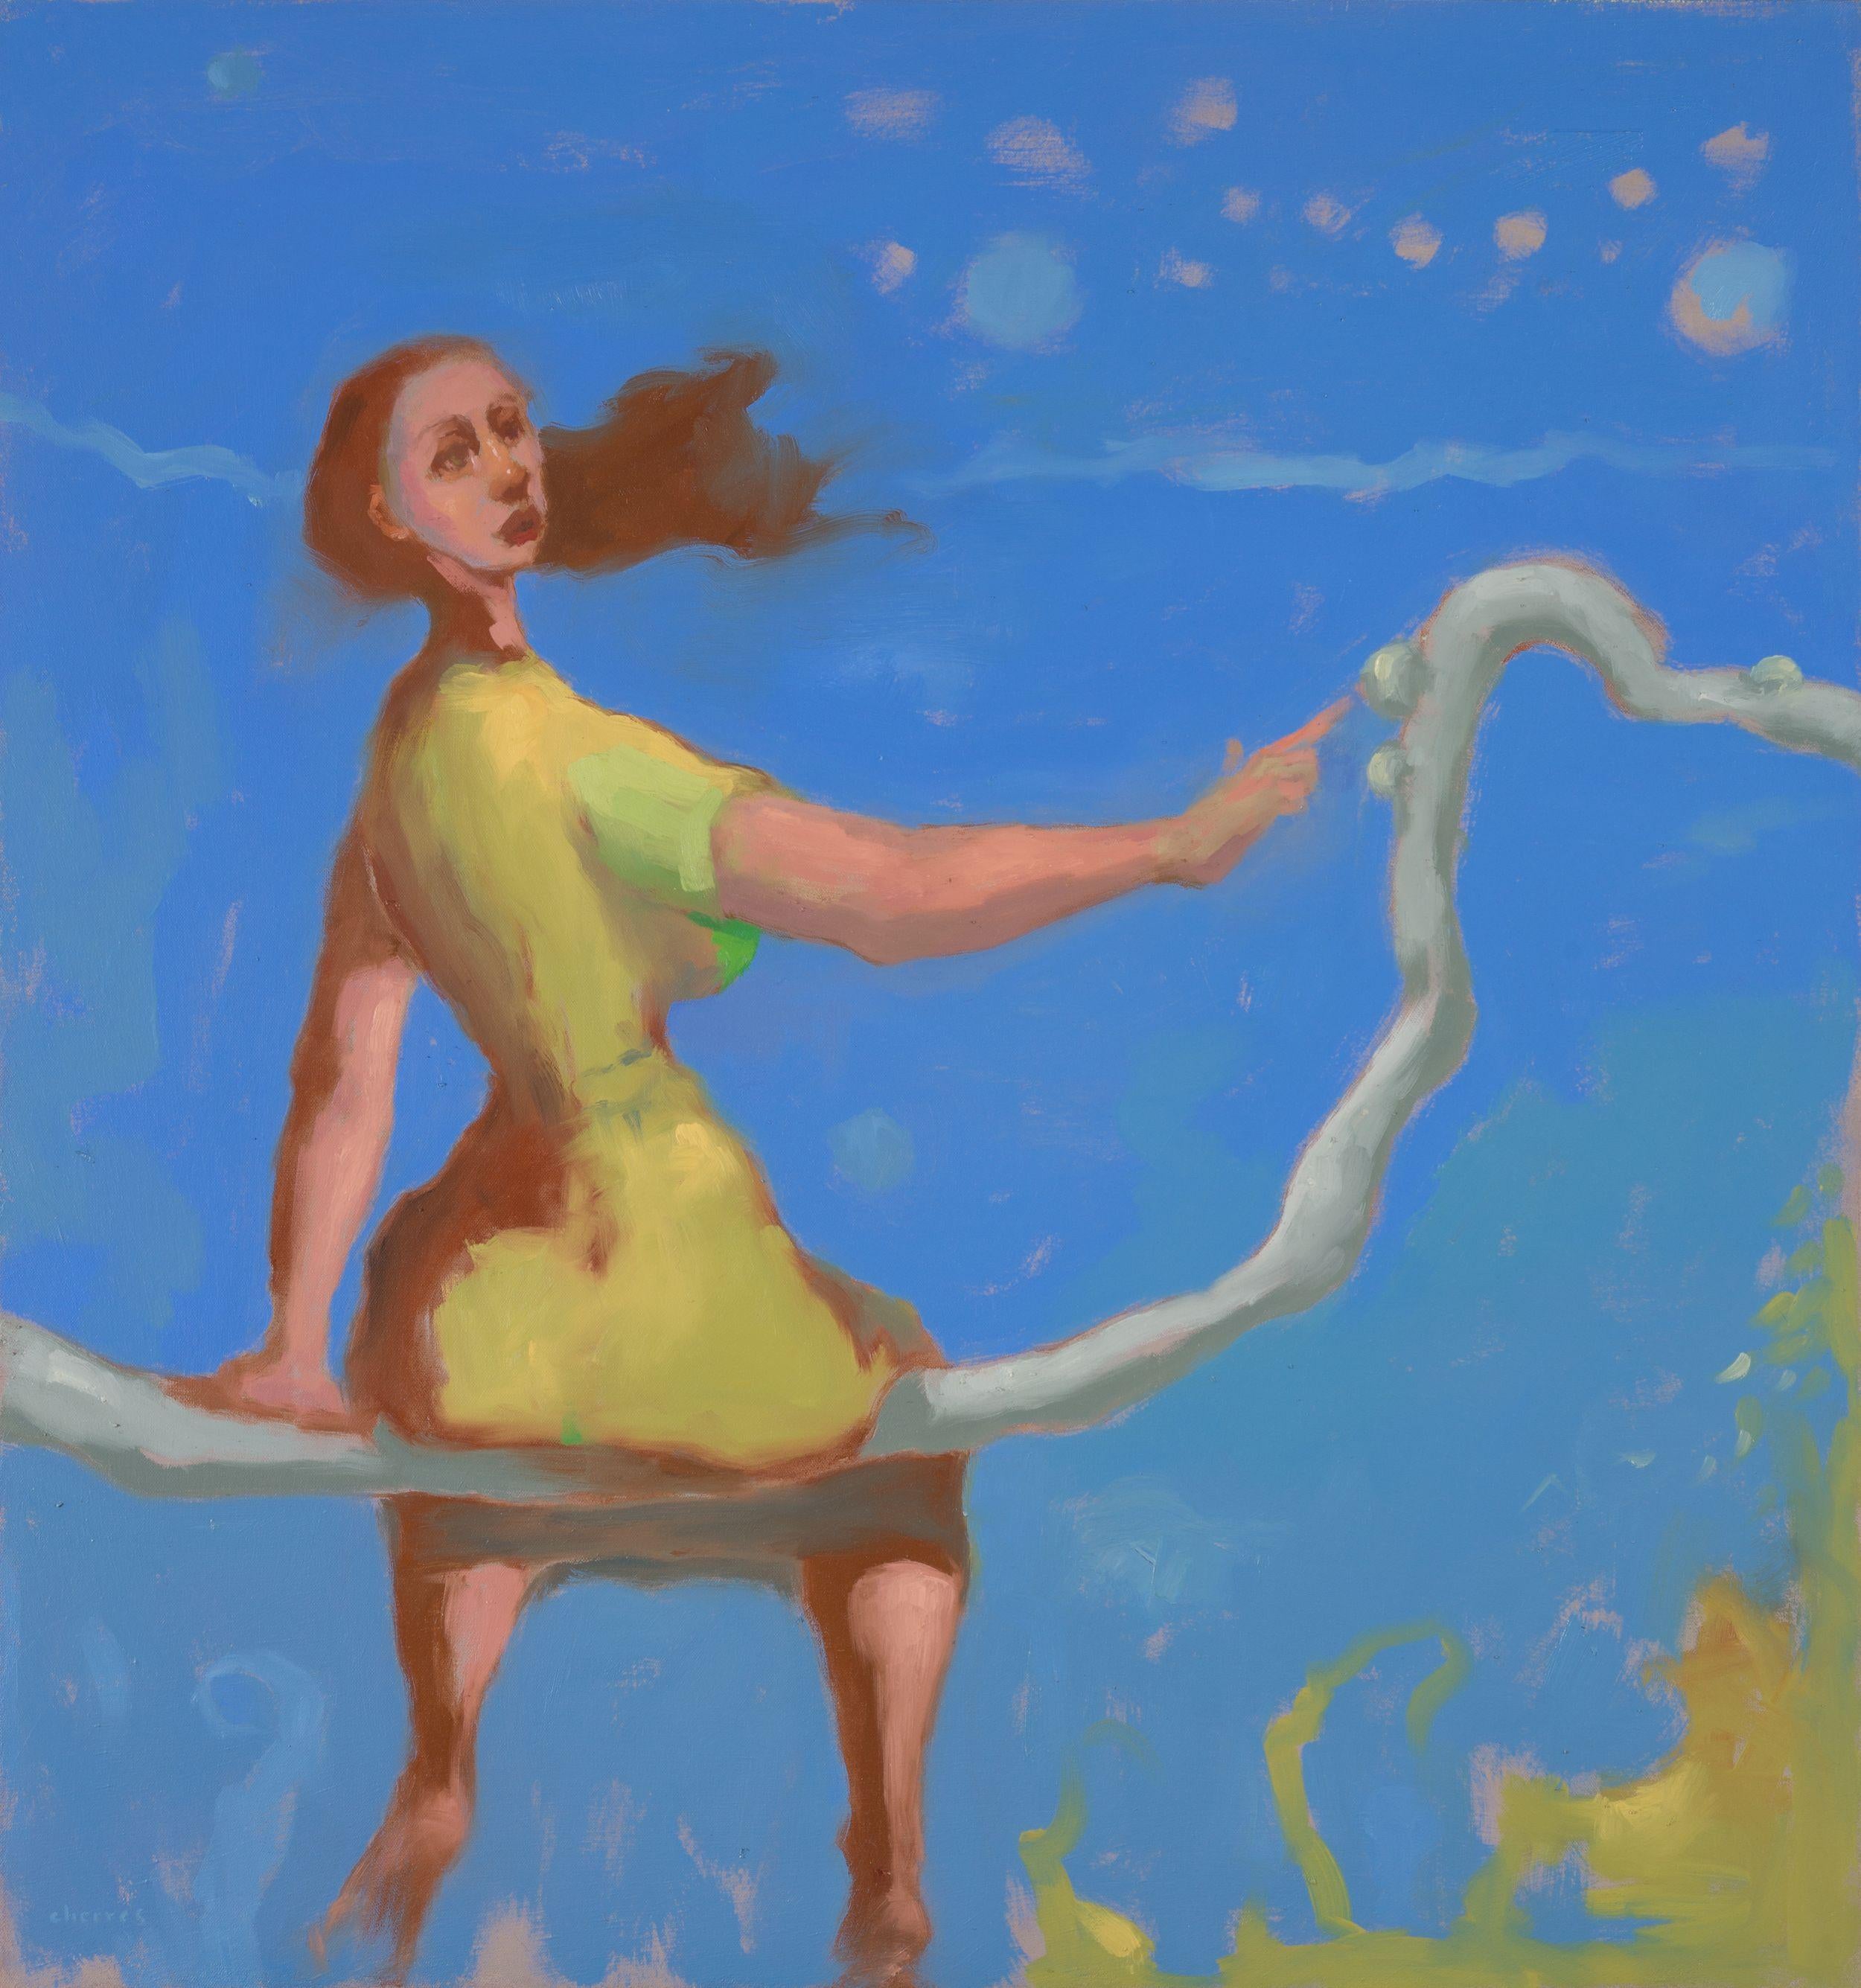 These series are about our relentless search for something in our lifetimes, whether is something tangible or not. Although the painting is very objective, usually women reaching for mushrooms in rather uncomfortable positions, it is actually